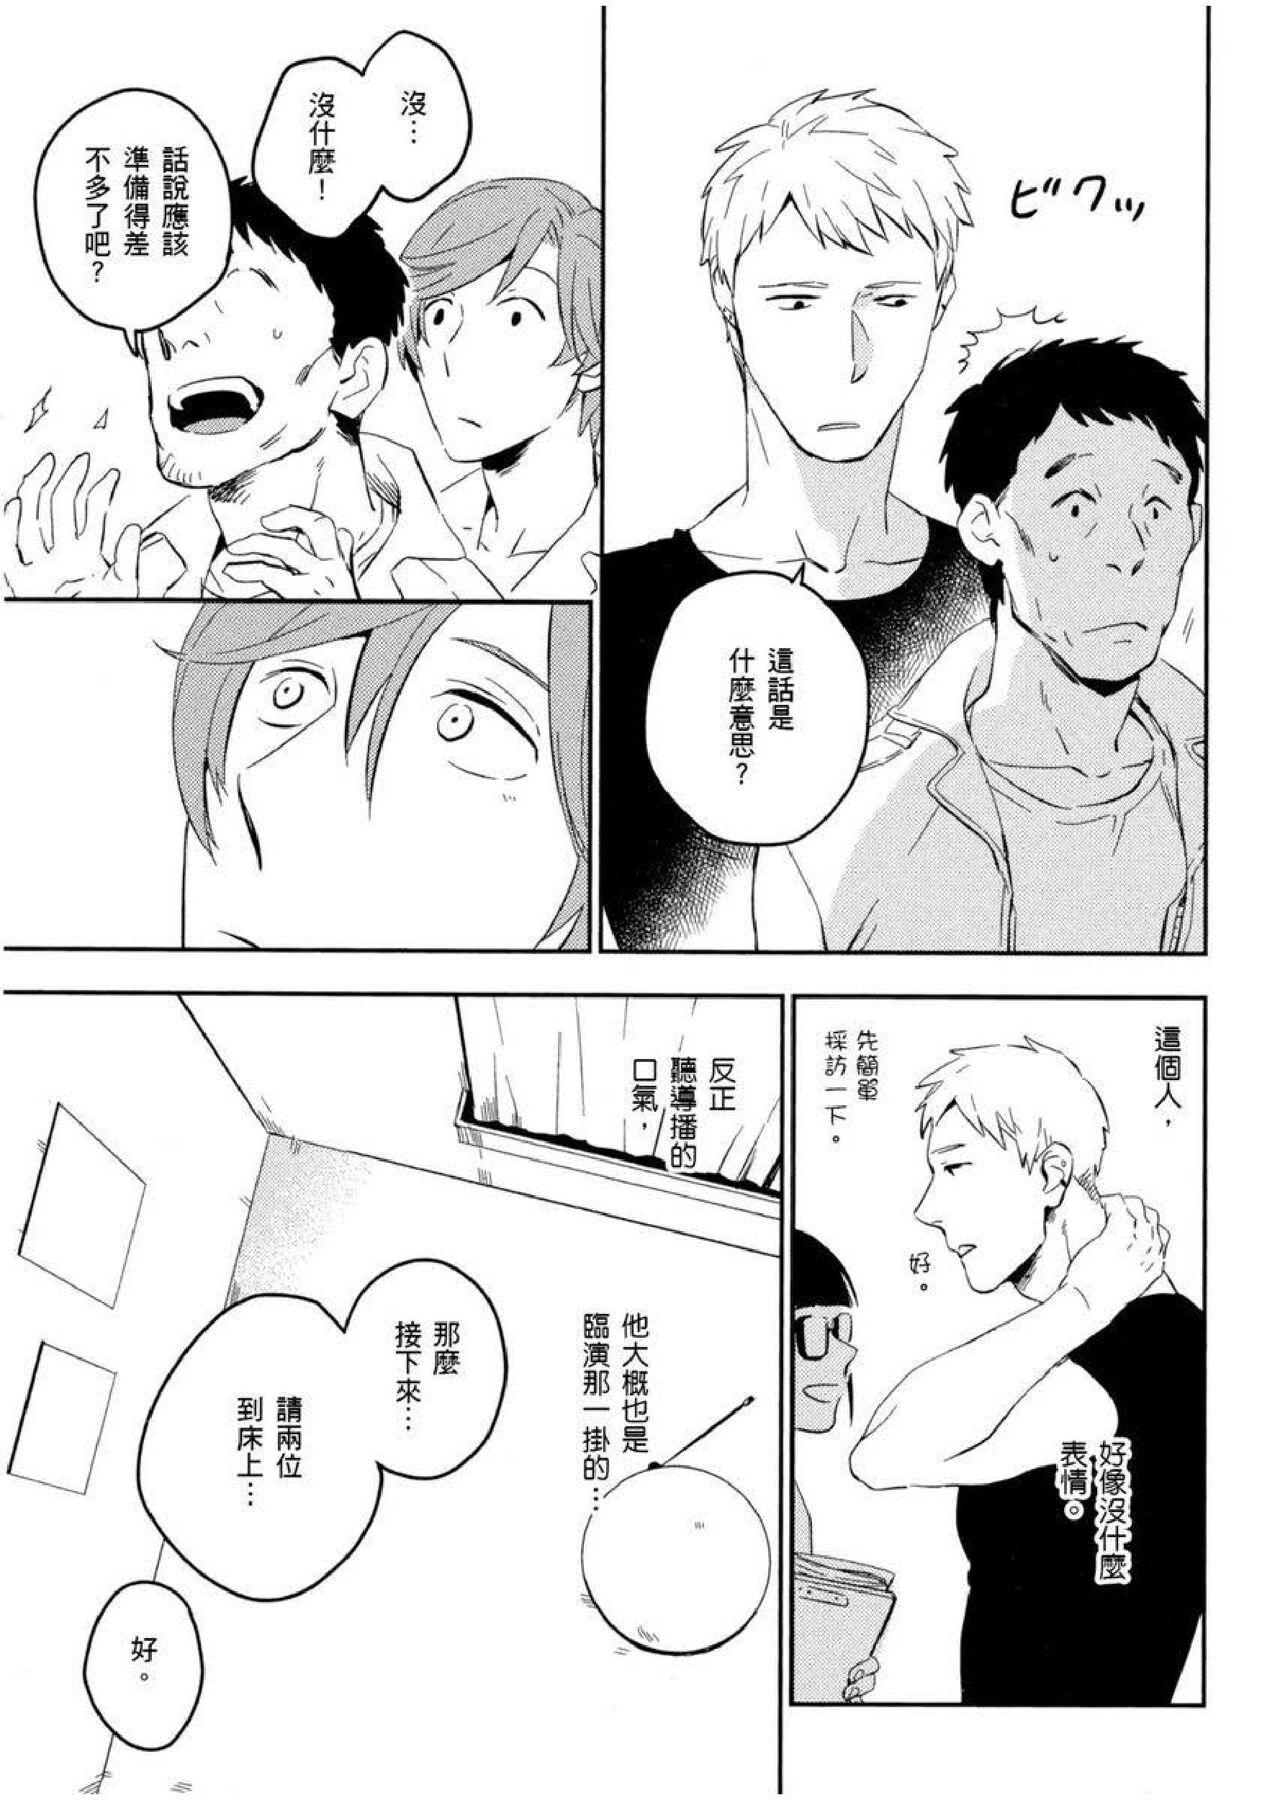 Rebolando Soine Lovers | 陪睡Lovers Cei - Page 12